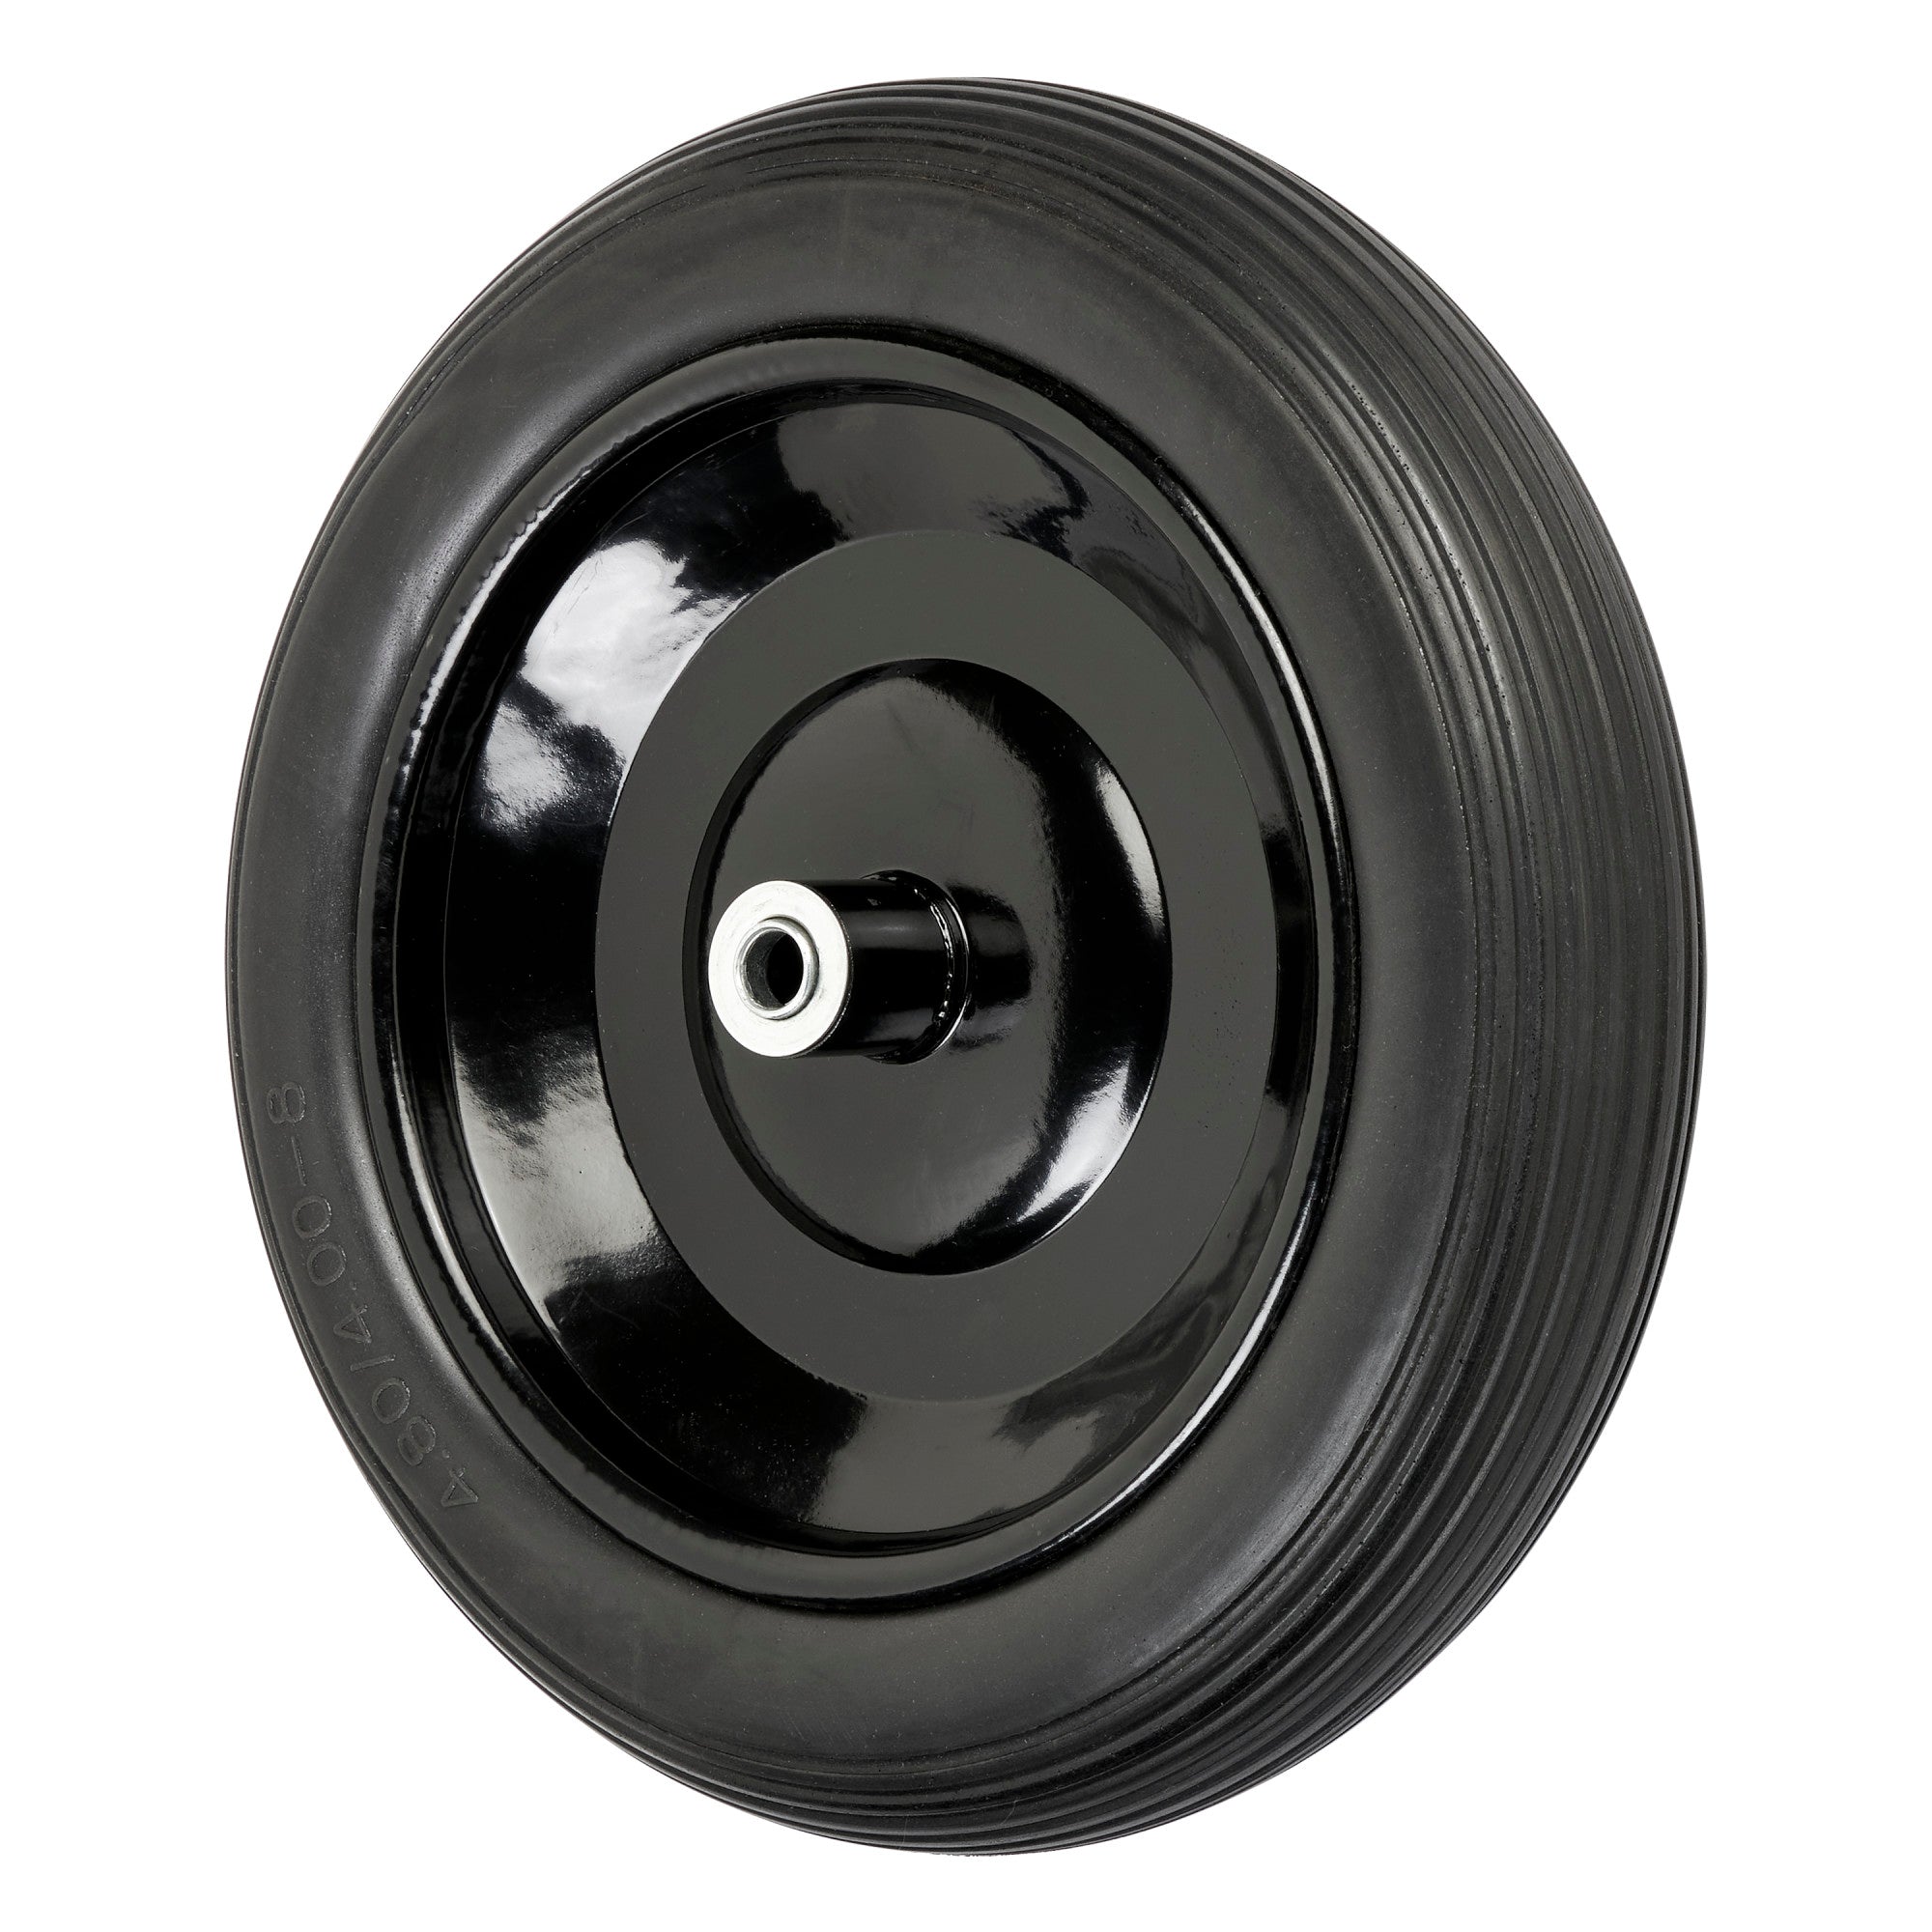 WB 1000 Replacement Wheel and Tire